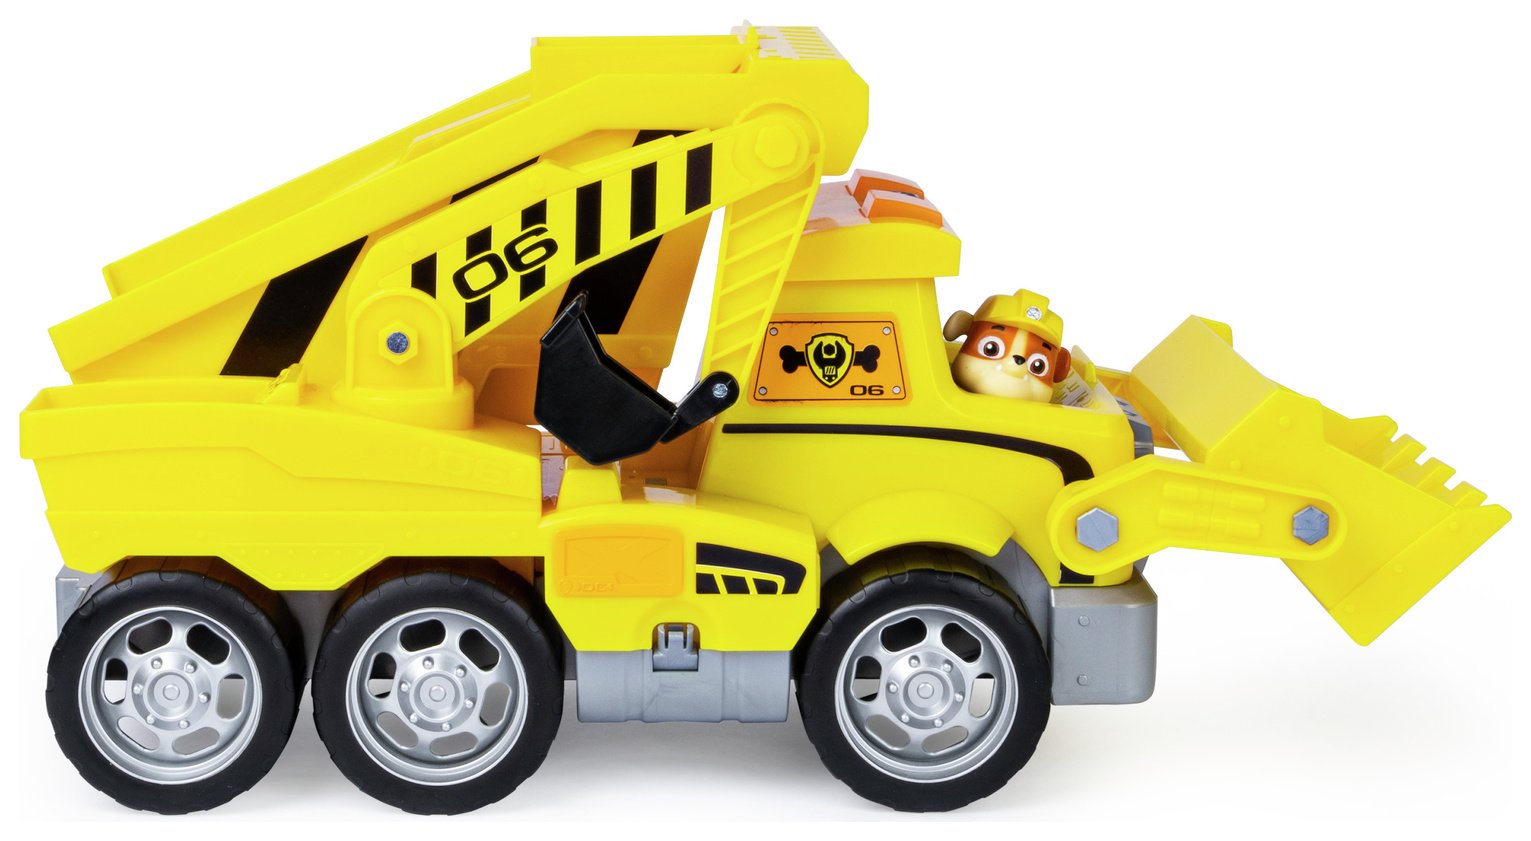 PAW Patrol Ultimate Construction Truck Review